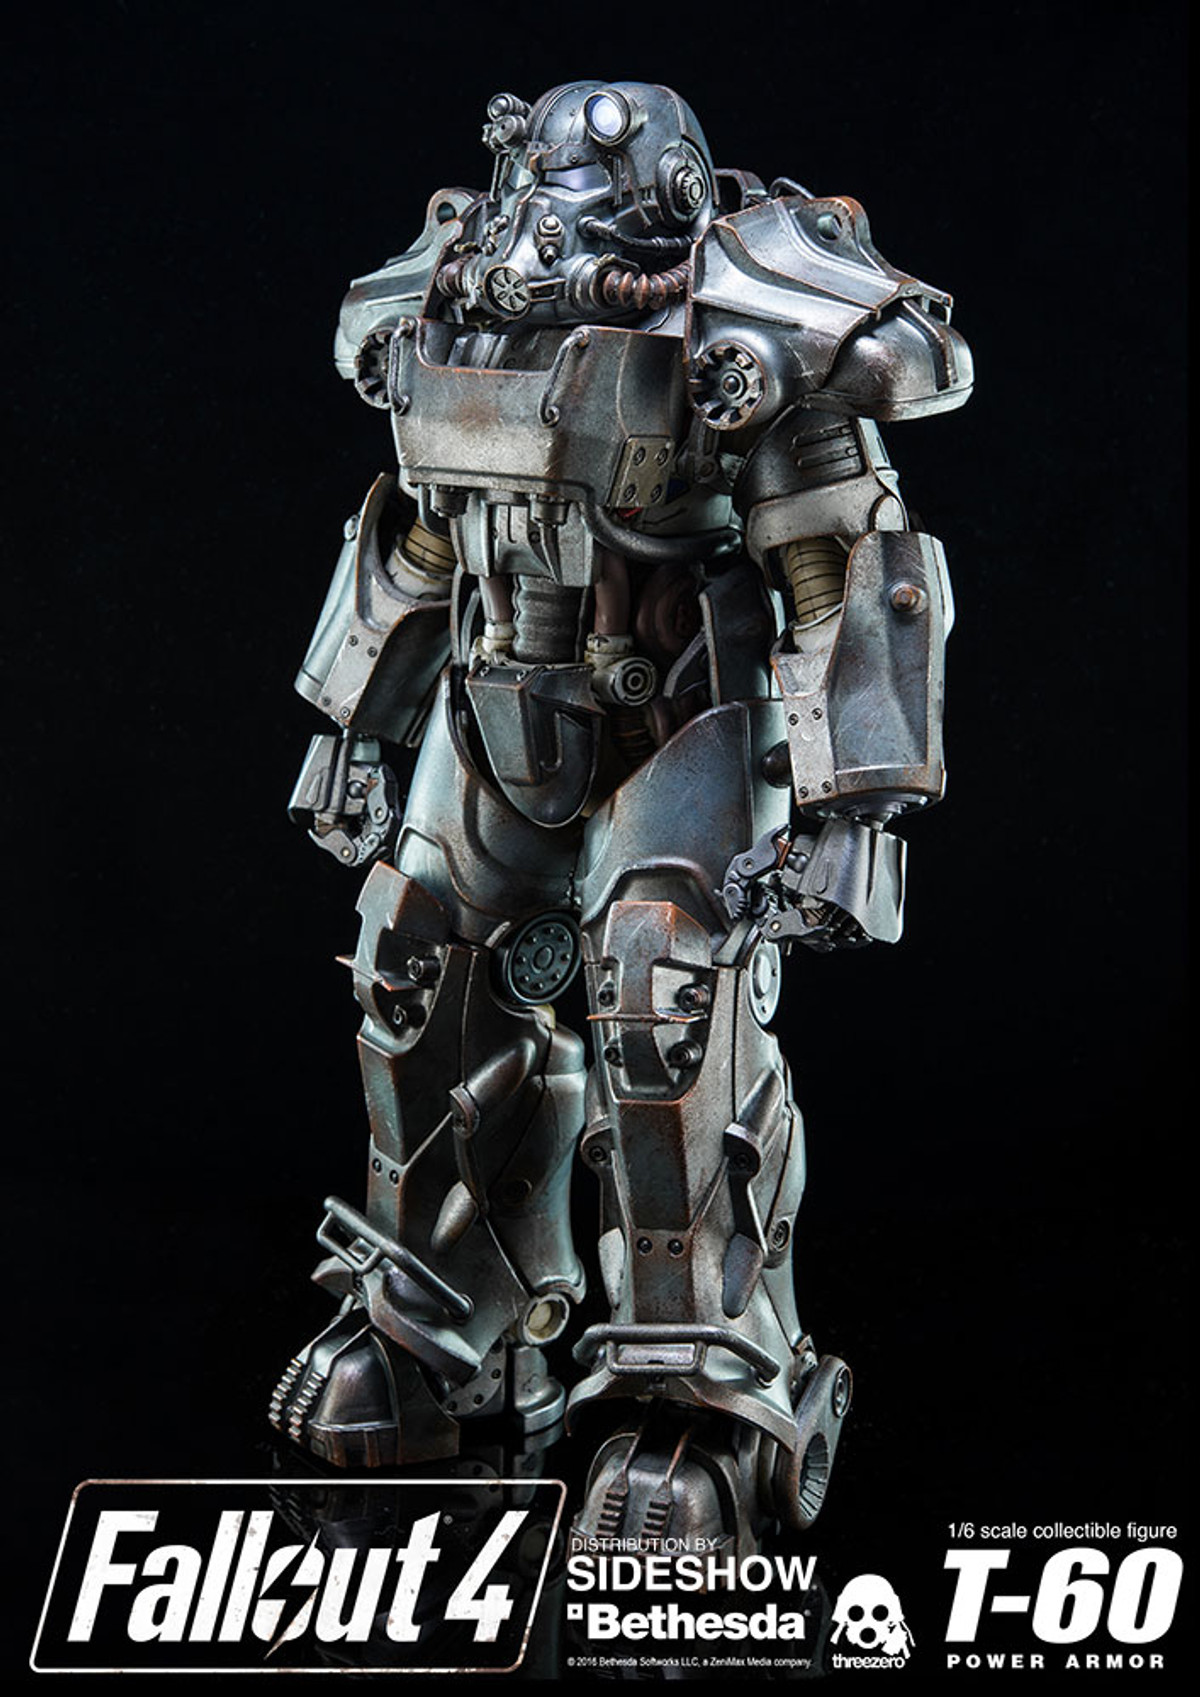 Sideshow Fallout 4 T 60 Power Armor